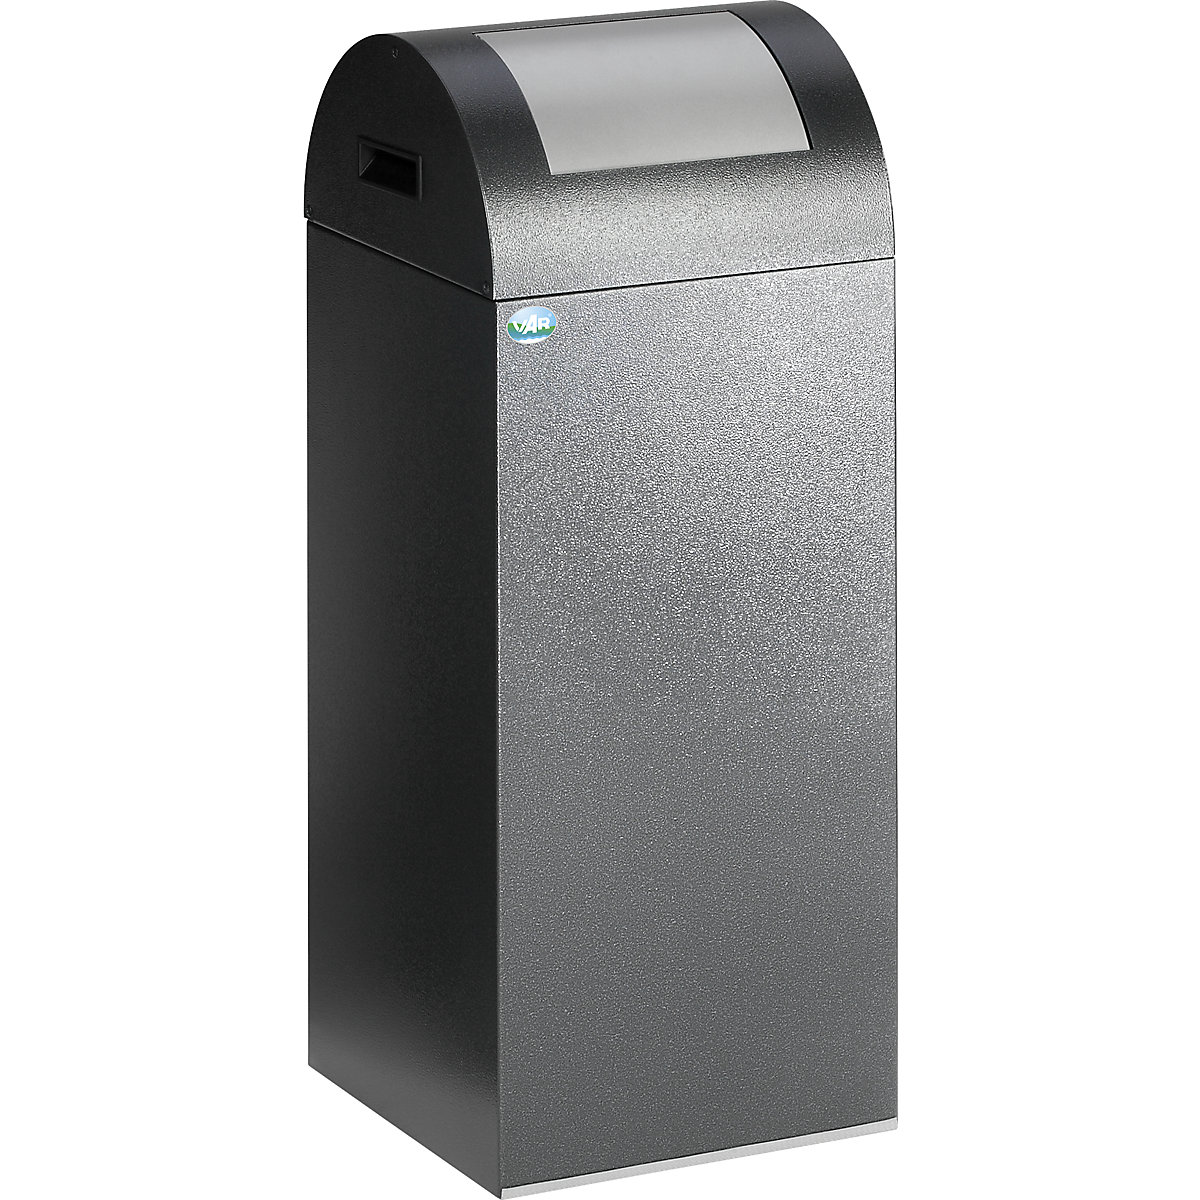 Self extinguishing recyclable waste collector – VAR, capacity 60 l, WxHxD 320 x 800 x 320 mm, antique silver, silver flap-5